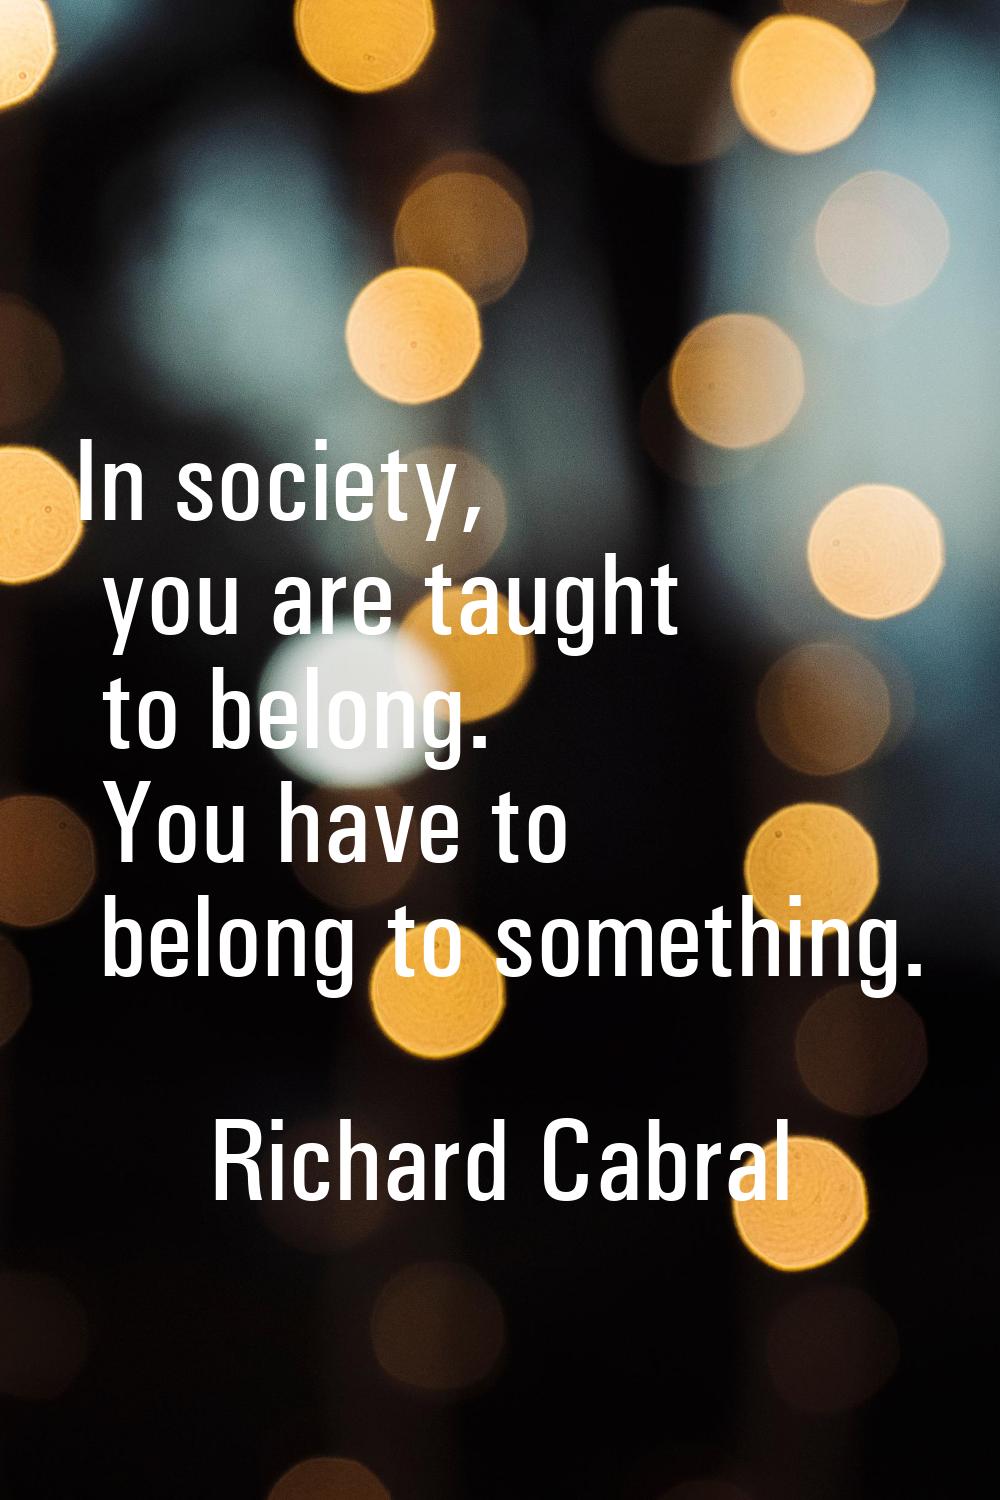 In society, you are taught to belong. You have to belong to something.